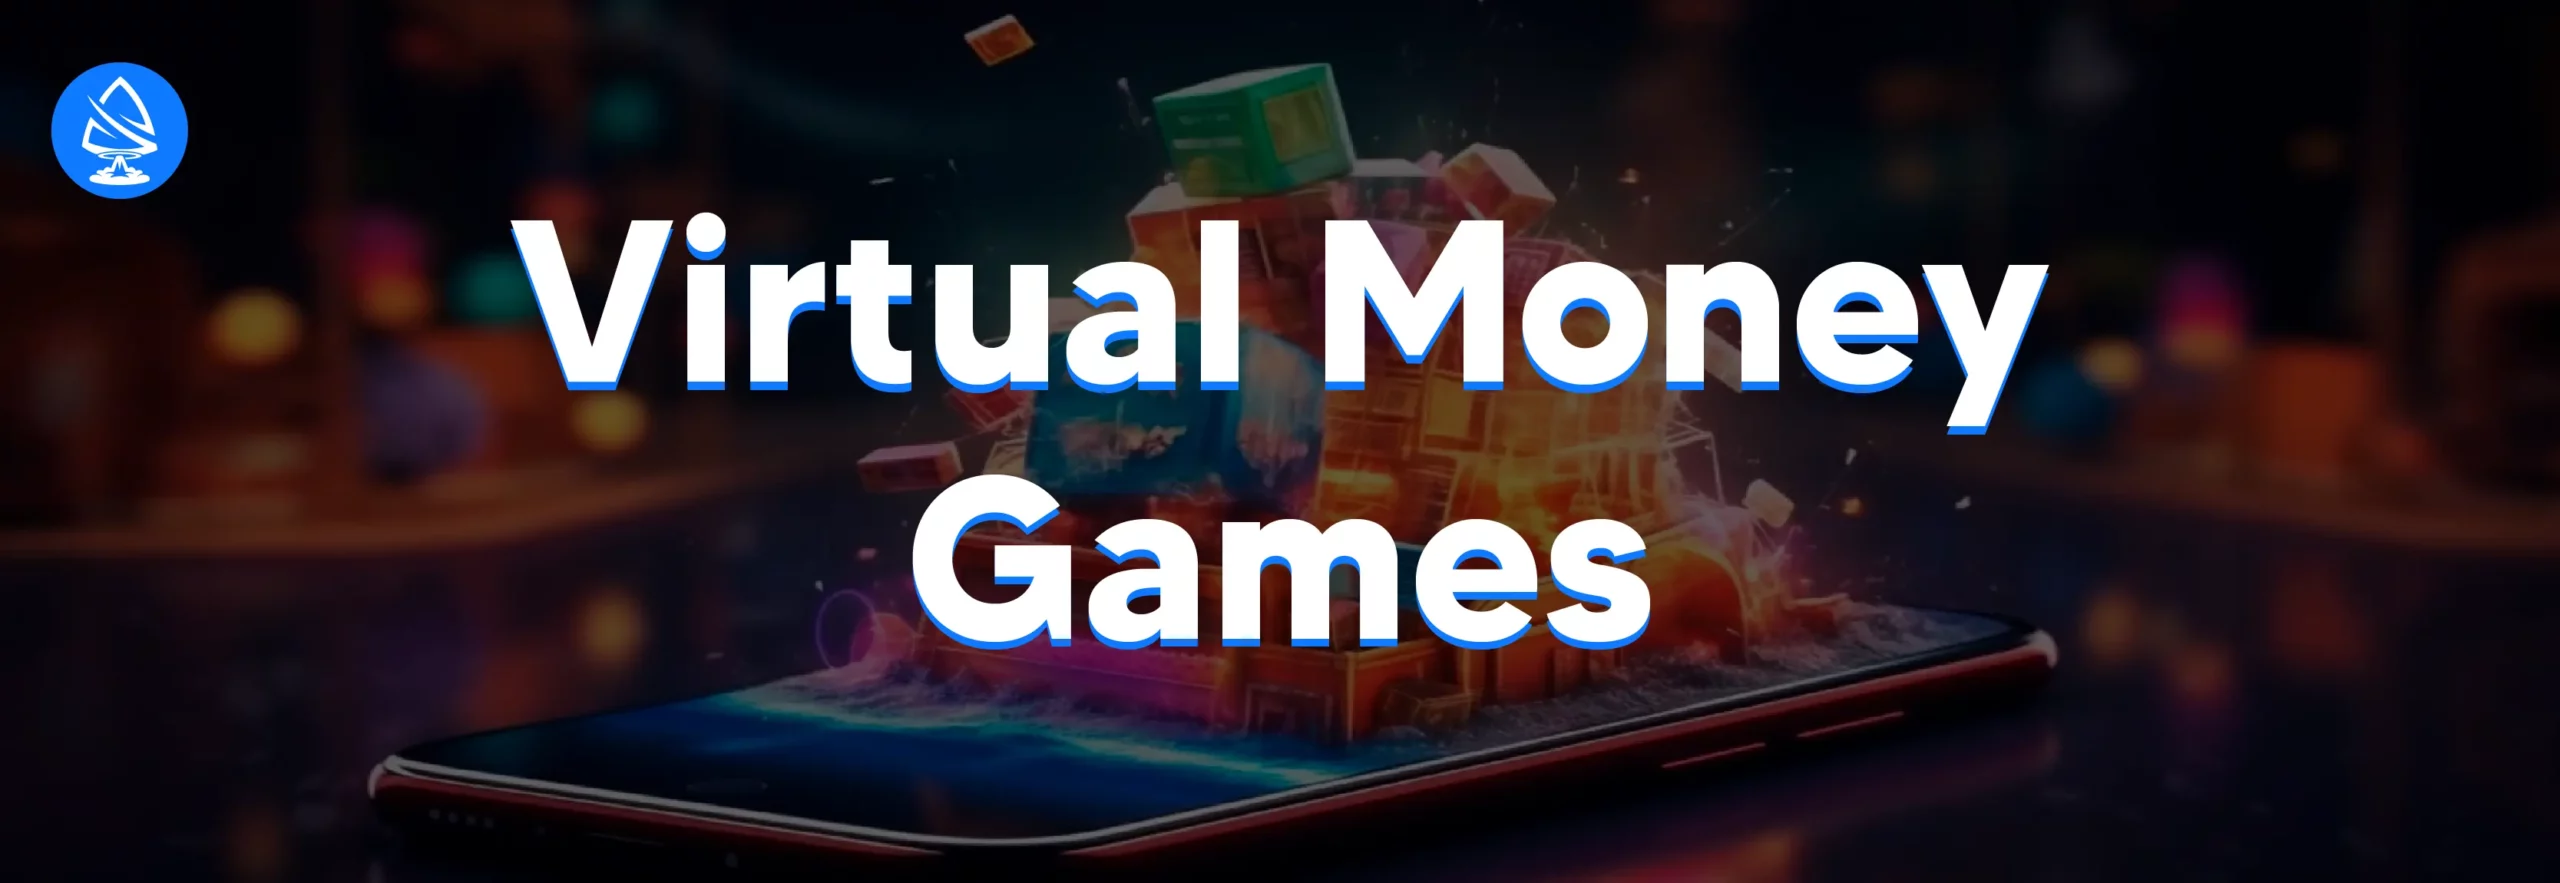 Impact of Virtual Money Games - Free-to-play games